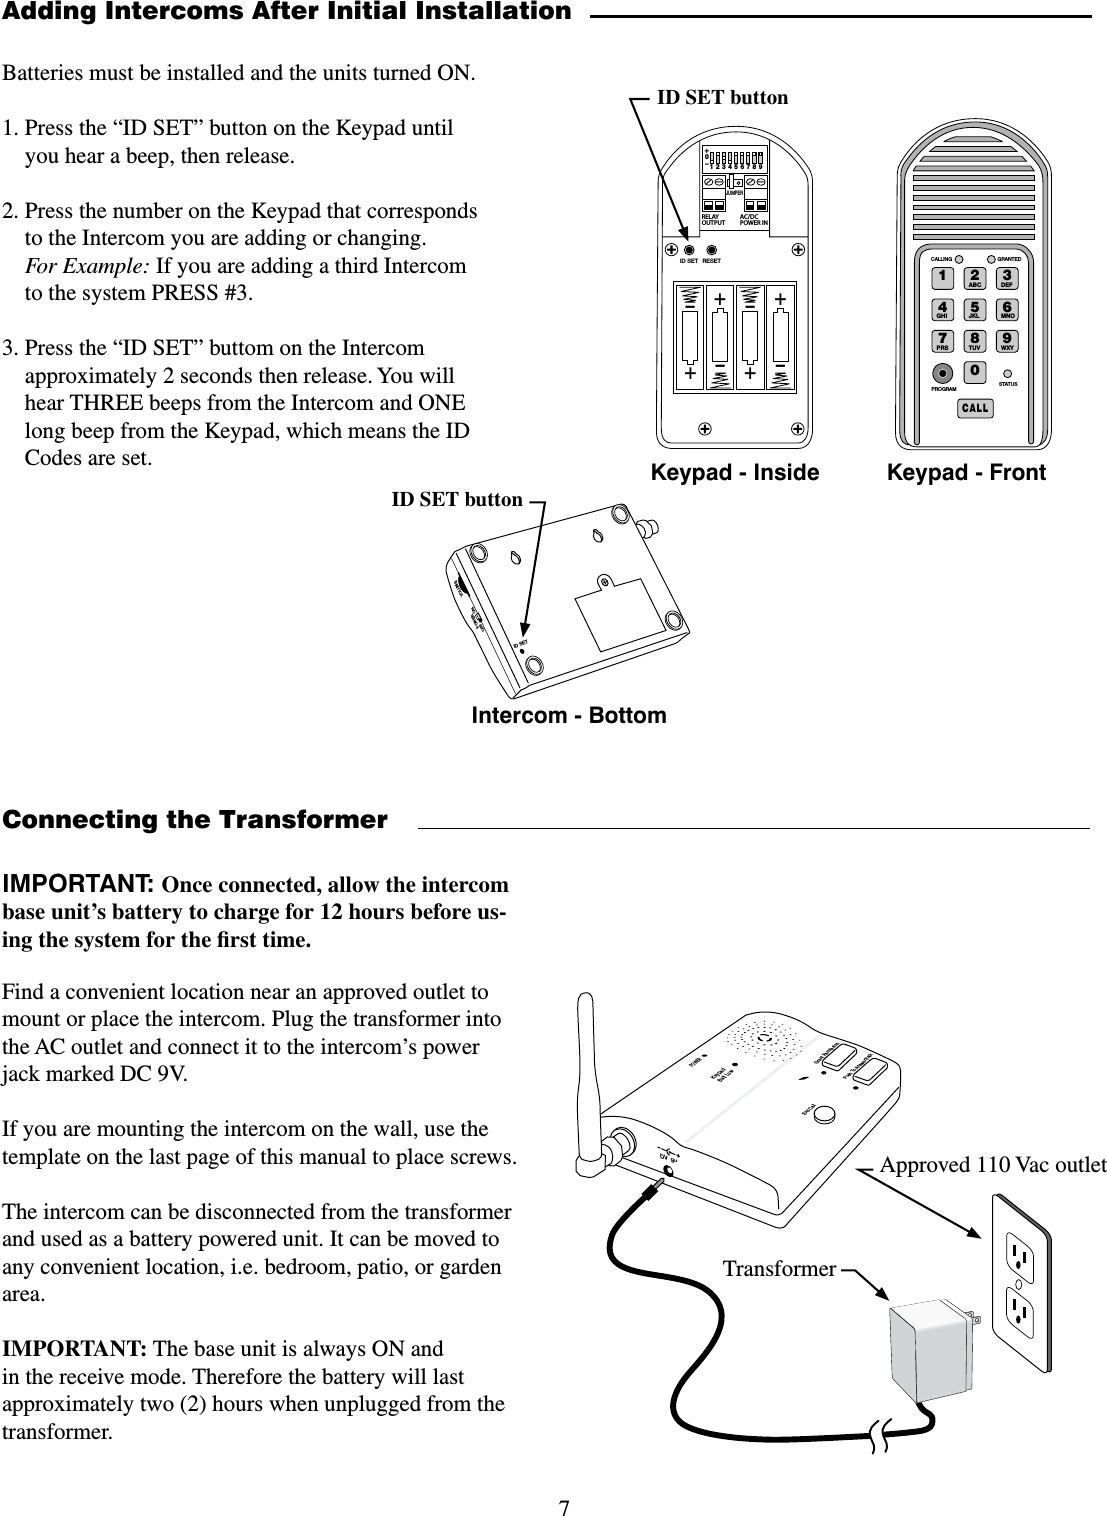 7Find a convenient location near an approved outlet to mount or place the intercom. Plug the transformer into the AC outlet and connect it to the intercom’s power jack marked DC 9V.If you are mounting the intercom on the wall, use the template on the last page of this manual to place screws.The intercom can be disconnected from the transformer and used as a battery powered unit. It can be moved to any convenient location, i.e. bedroom, patio, or garden area.IMPORTANT: The base unit is always ON and in the receive mode. Therefore the battery will last approximately two (2) hours when unplugged from the transformer.Connecting the TransformerPOWERKeypadBatt LowGrant PermissionPush To Answer/TalkEnd CallDV  9VTransformerApproved 110 Vac outletIMPORTANT: Once connected, allow the intercom base unit’s battery to charge for 12 hours before us-ing the system for the ﬁrst time. Adding Intercoms After Initial InstallationBatteries must be installed and the units turned ON.1. Press the “ID SET” button on the Keypad until you hear a beep, then release.2. Press the number on the Keypad that corresponds to the Intercom you are adding or changing. For Example: If you are adding a third Intercom to the system PRESS #3.3. Press the “ID SET” buttom on the Intercom approximately 2 seconds then release. You will hear THREE beeps from the Intercom and ONE long beep from the Keypad, which means the ID Codes are set.2%,!9/54054!#$#0/7%2).o*%4&amp;5oooo3&amp;4&amp;5+6.1&amp;3ID SET buttonID SETVOLUMEPOWEROFF ONKeypad - InsideIntercom - Bottom &quot;#$%&amp;&apos;()*+,-./013456789:$&quot;--45&quot;564130(3&quot;.$&quot;--*/( (3&quot;/5&amp;%Keypad - FrontID SET button